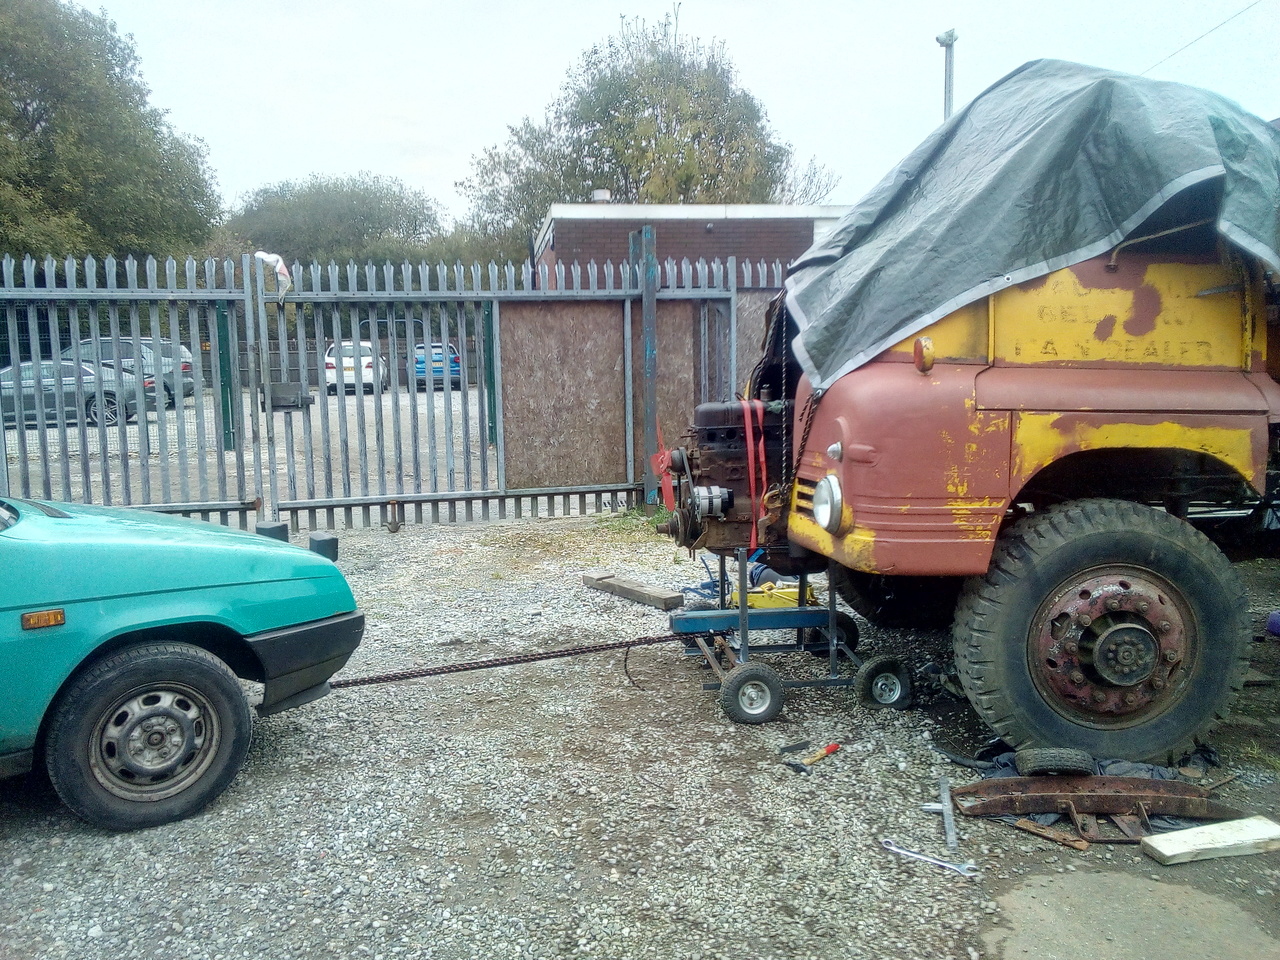 The engine on its cradle is starting to be inched out of the
front of the truck, towed on a piece of rope by a tatty green car.